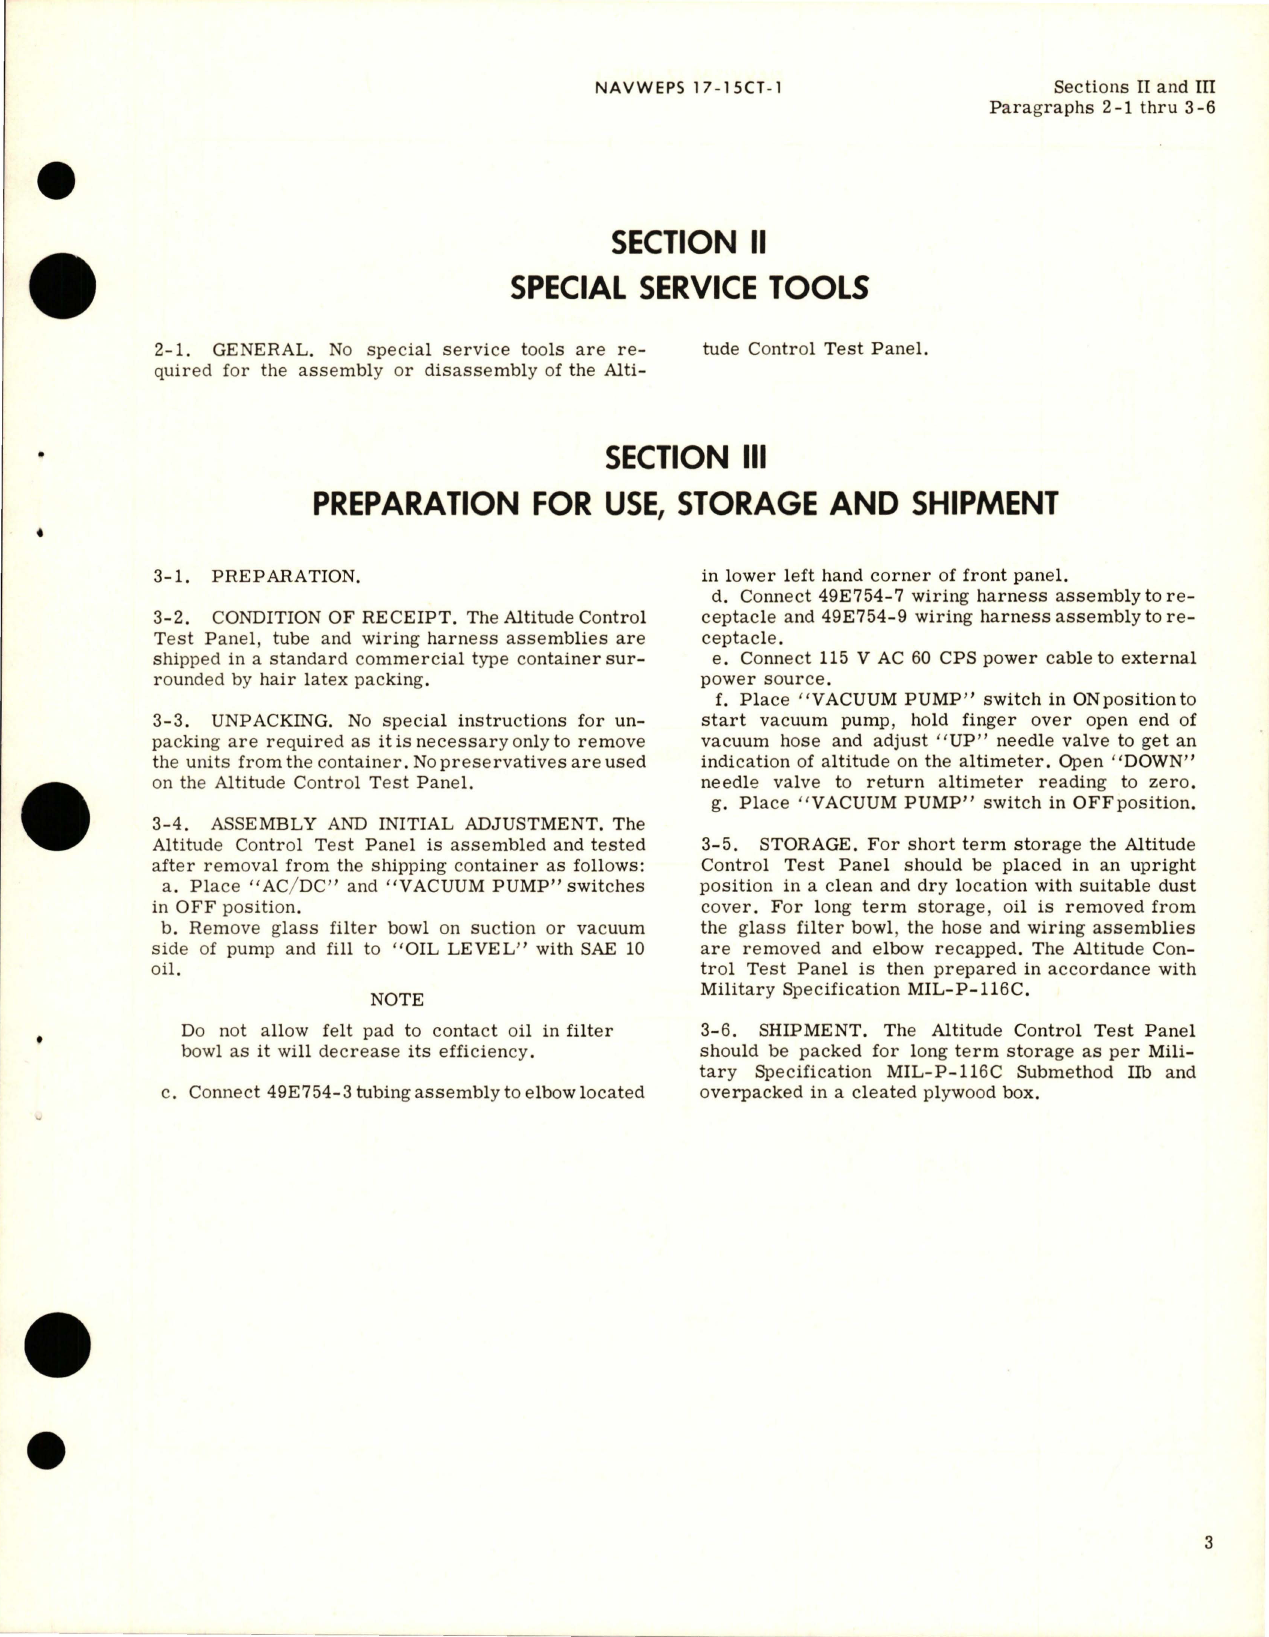 Sample page 7 from AirCorps Library document: Operation, Service Instructions and Parts Breakdown for Altitude Control Test Panel - Part 49E754-1